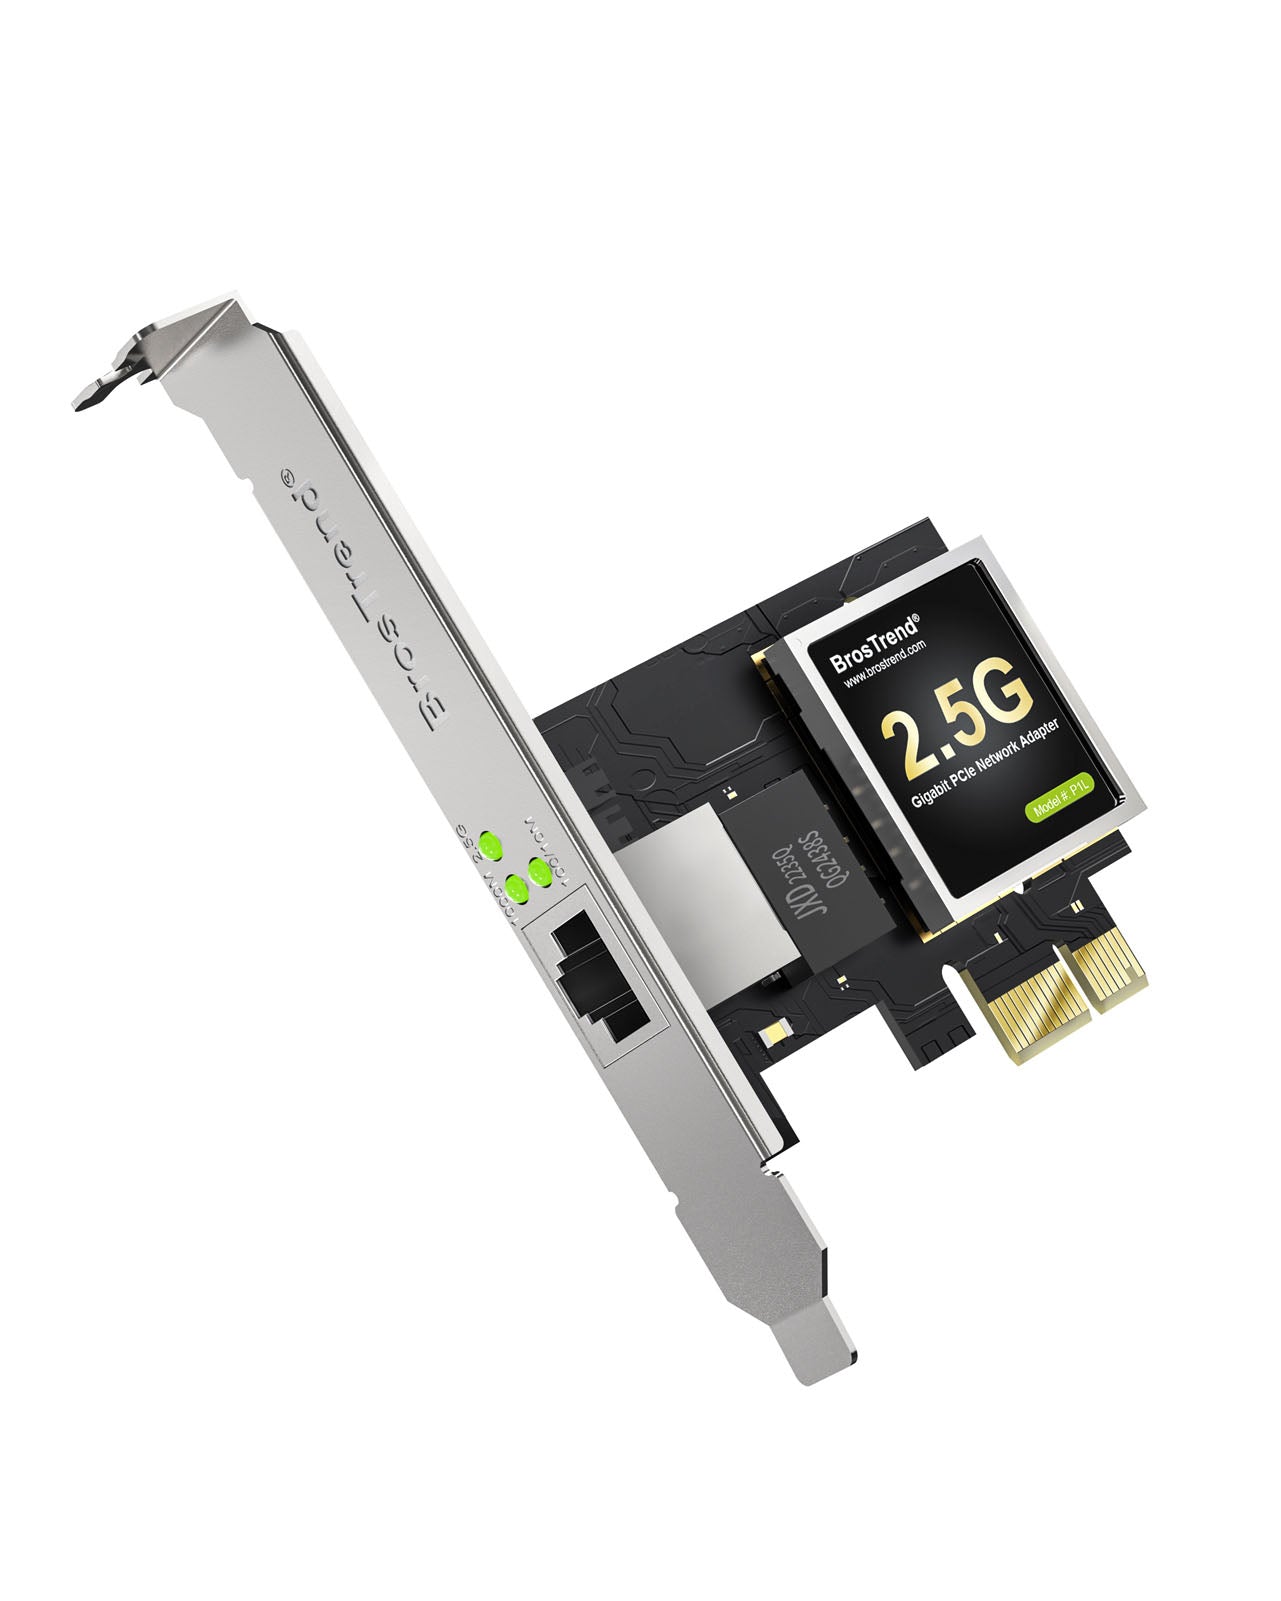 2.5GB Linux Compatible PCIe Network Card